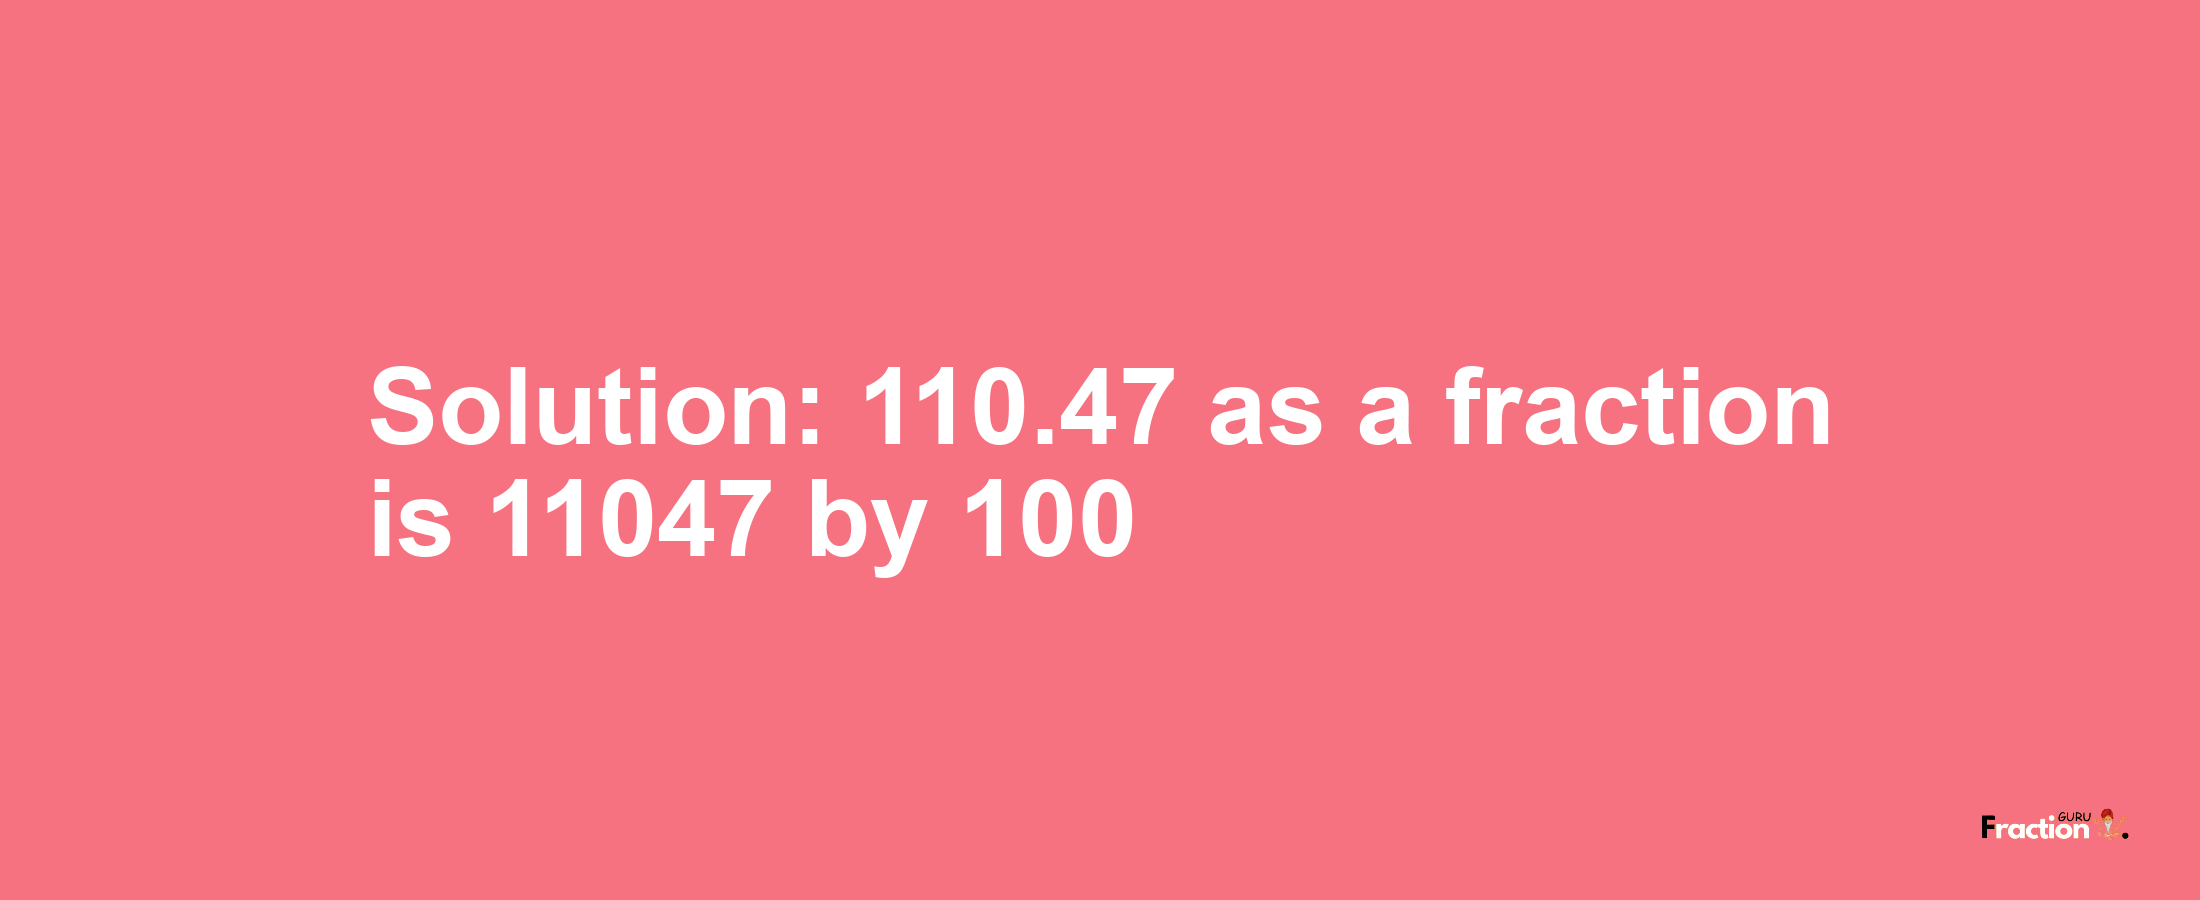 Solution:110.47 as a fraction is 11047/100